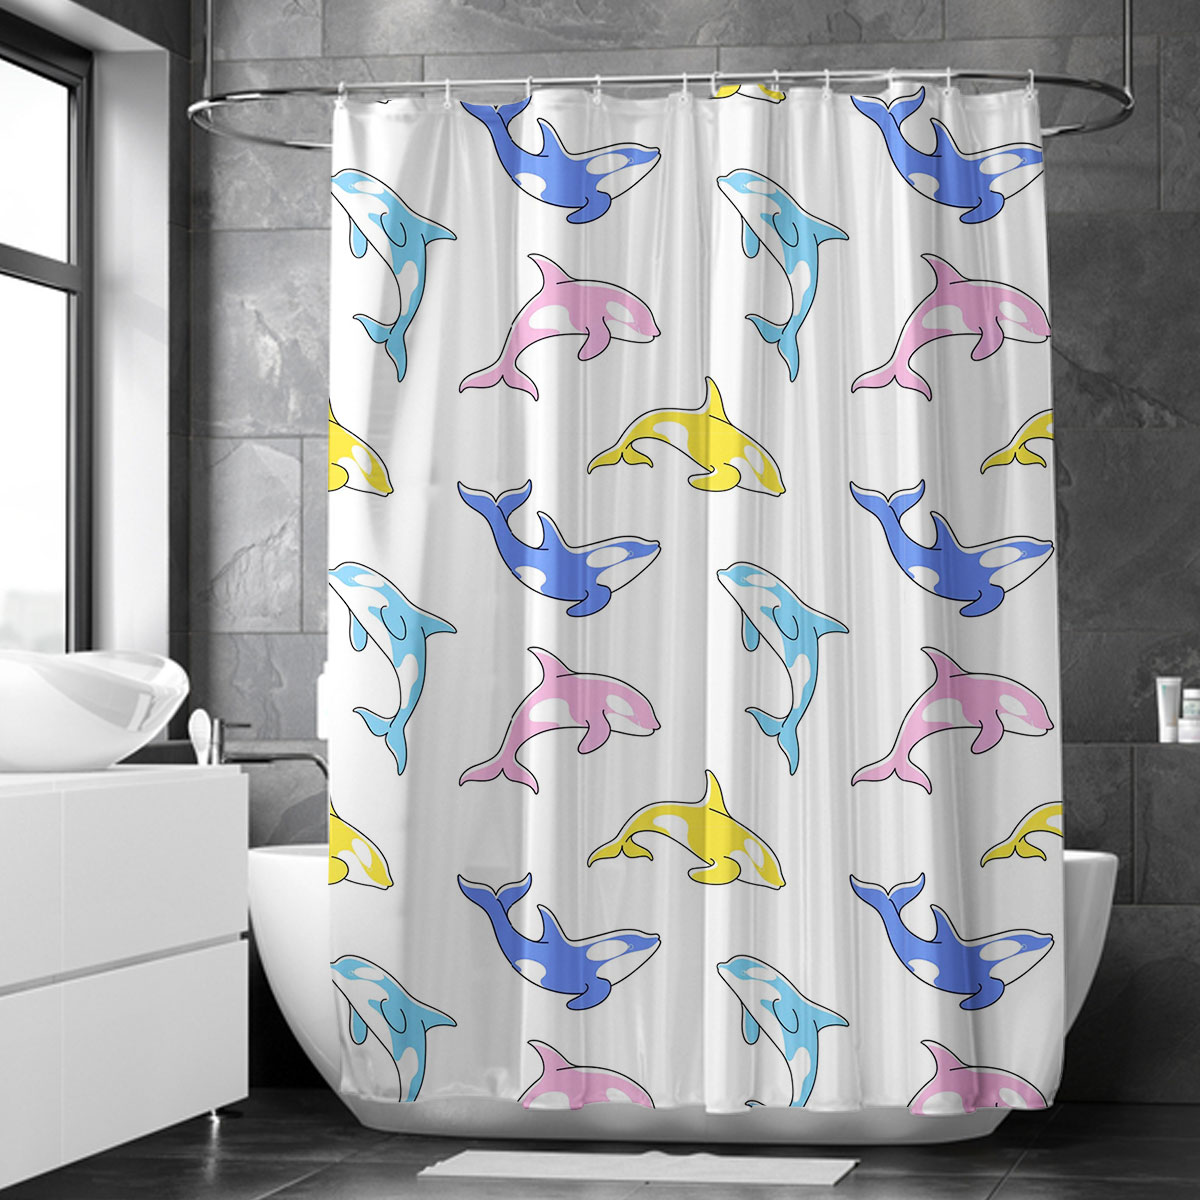 Colorful Orca Whale Shower Curtain